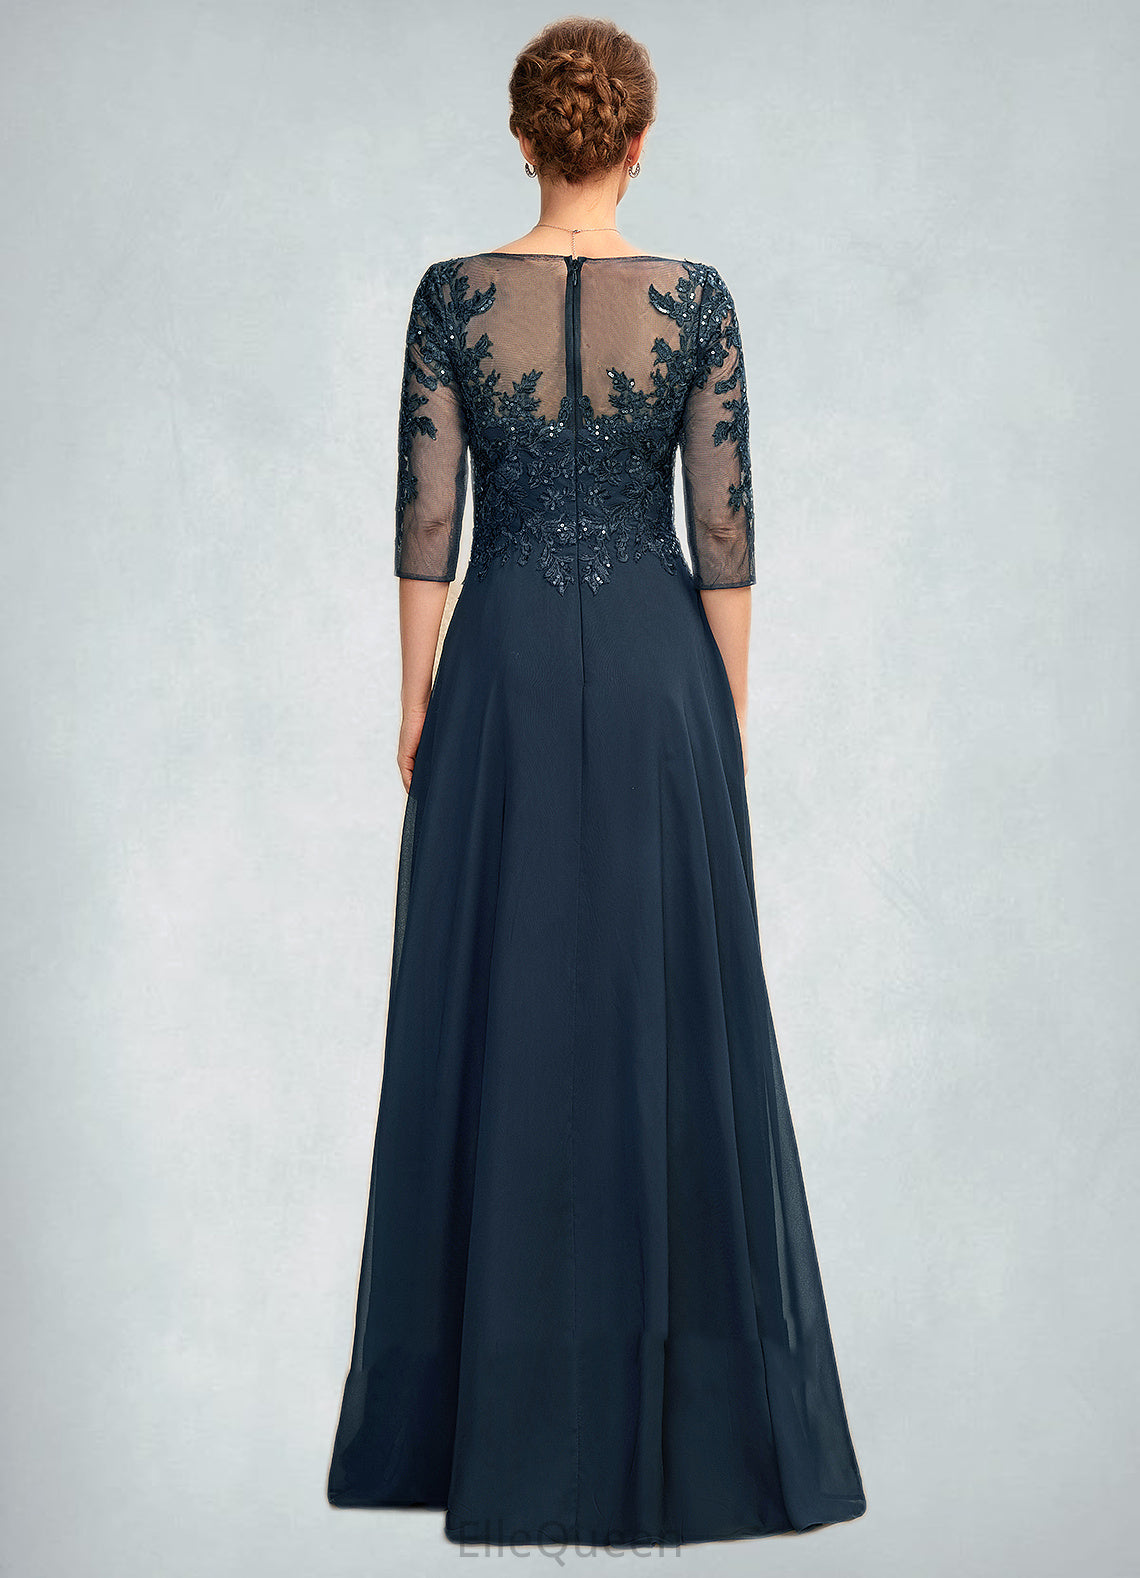 Tiana A-Line V-neck Floor-Length Chiffon Lace Mother of the Bride Dress With Sequins Split Front DG126P0015014